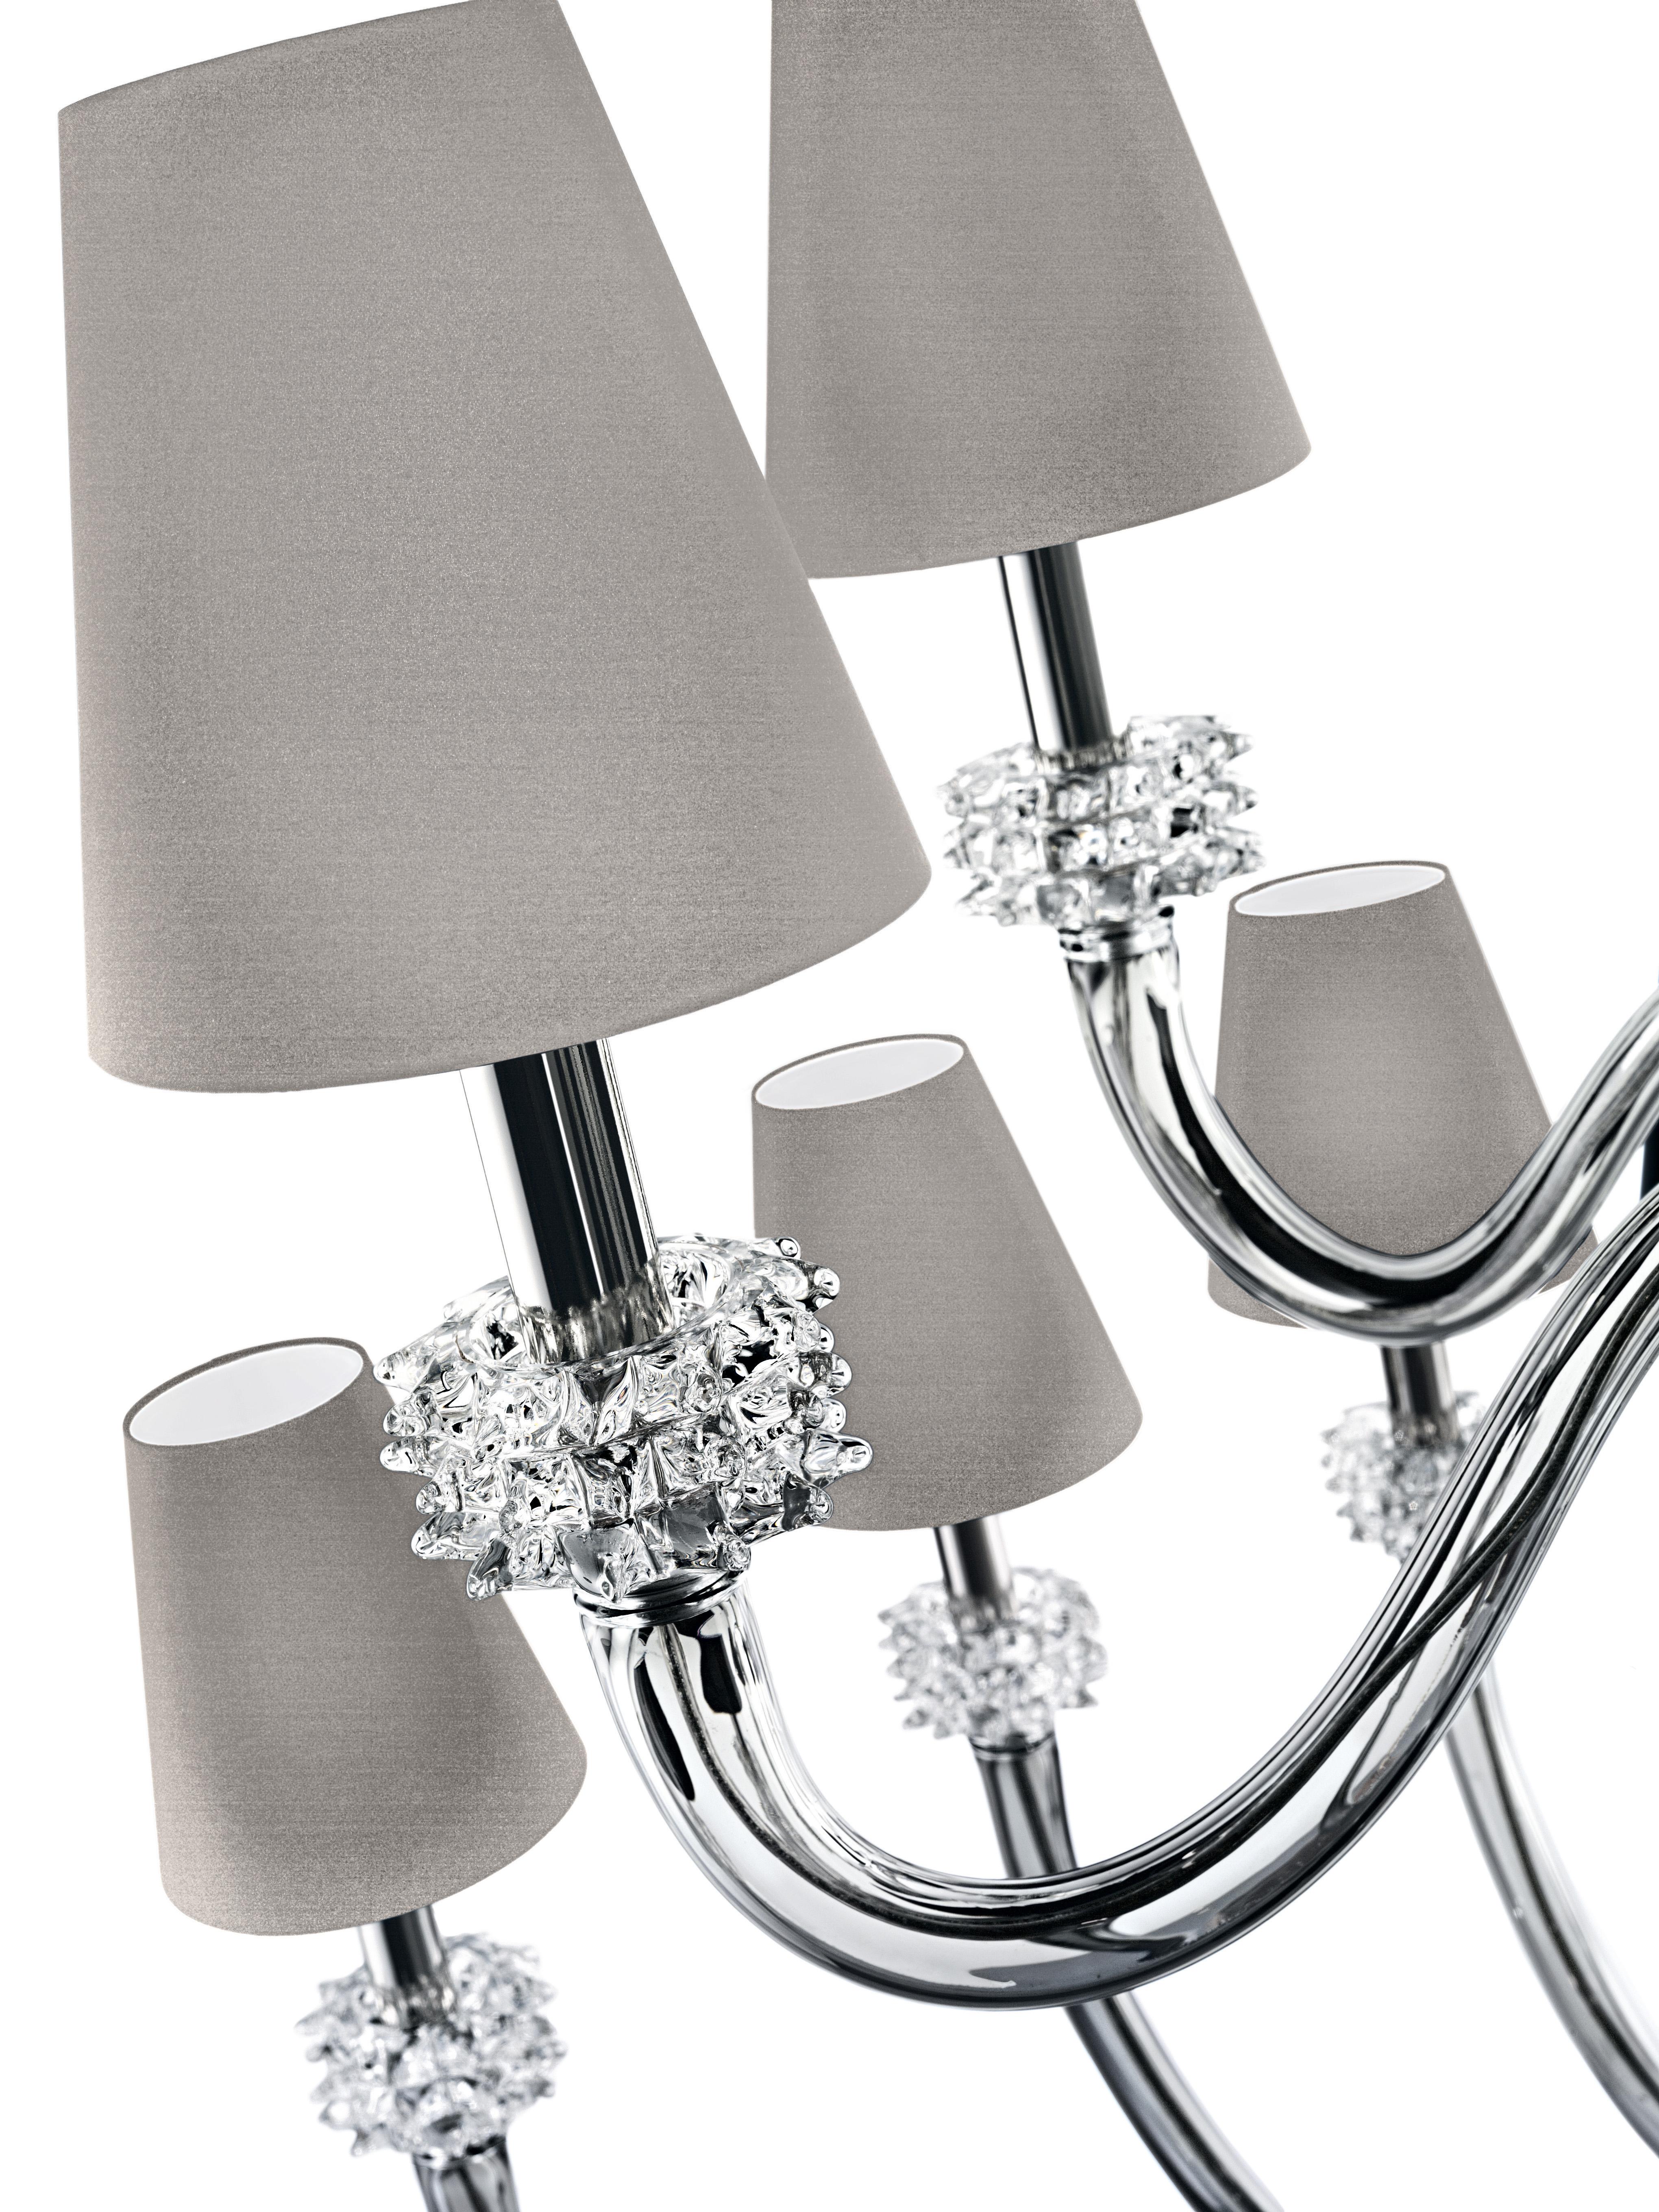 Amsterdam 5562 18 Chandelier in Chrome & Glass, Black Shade, by Barovier&Toso 1